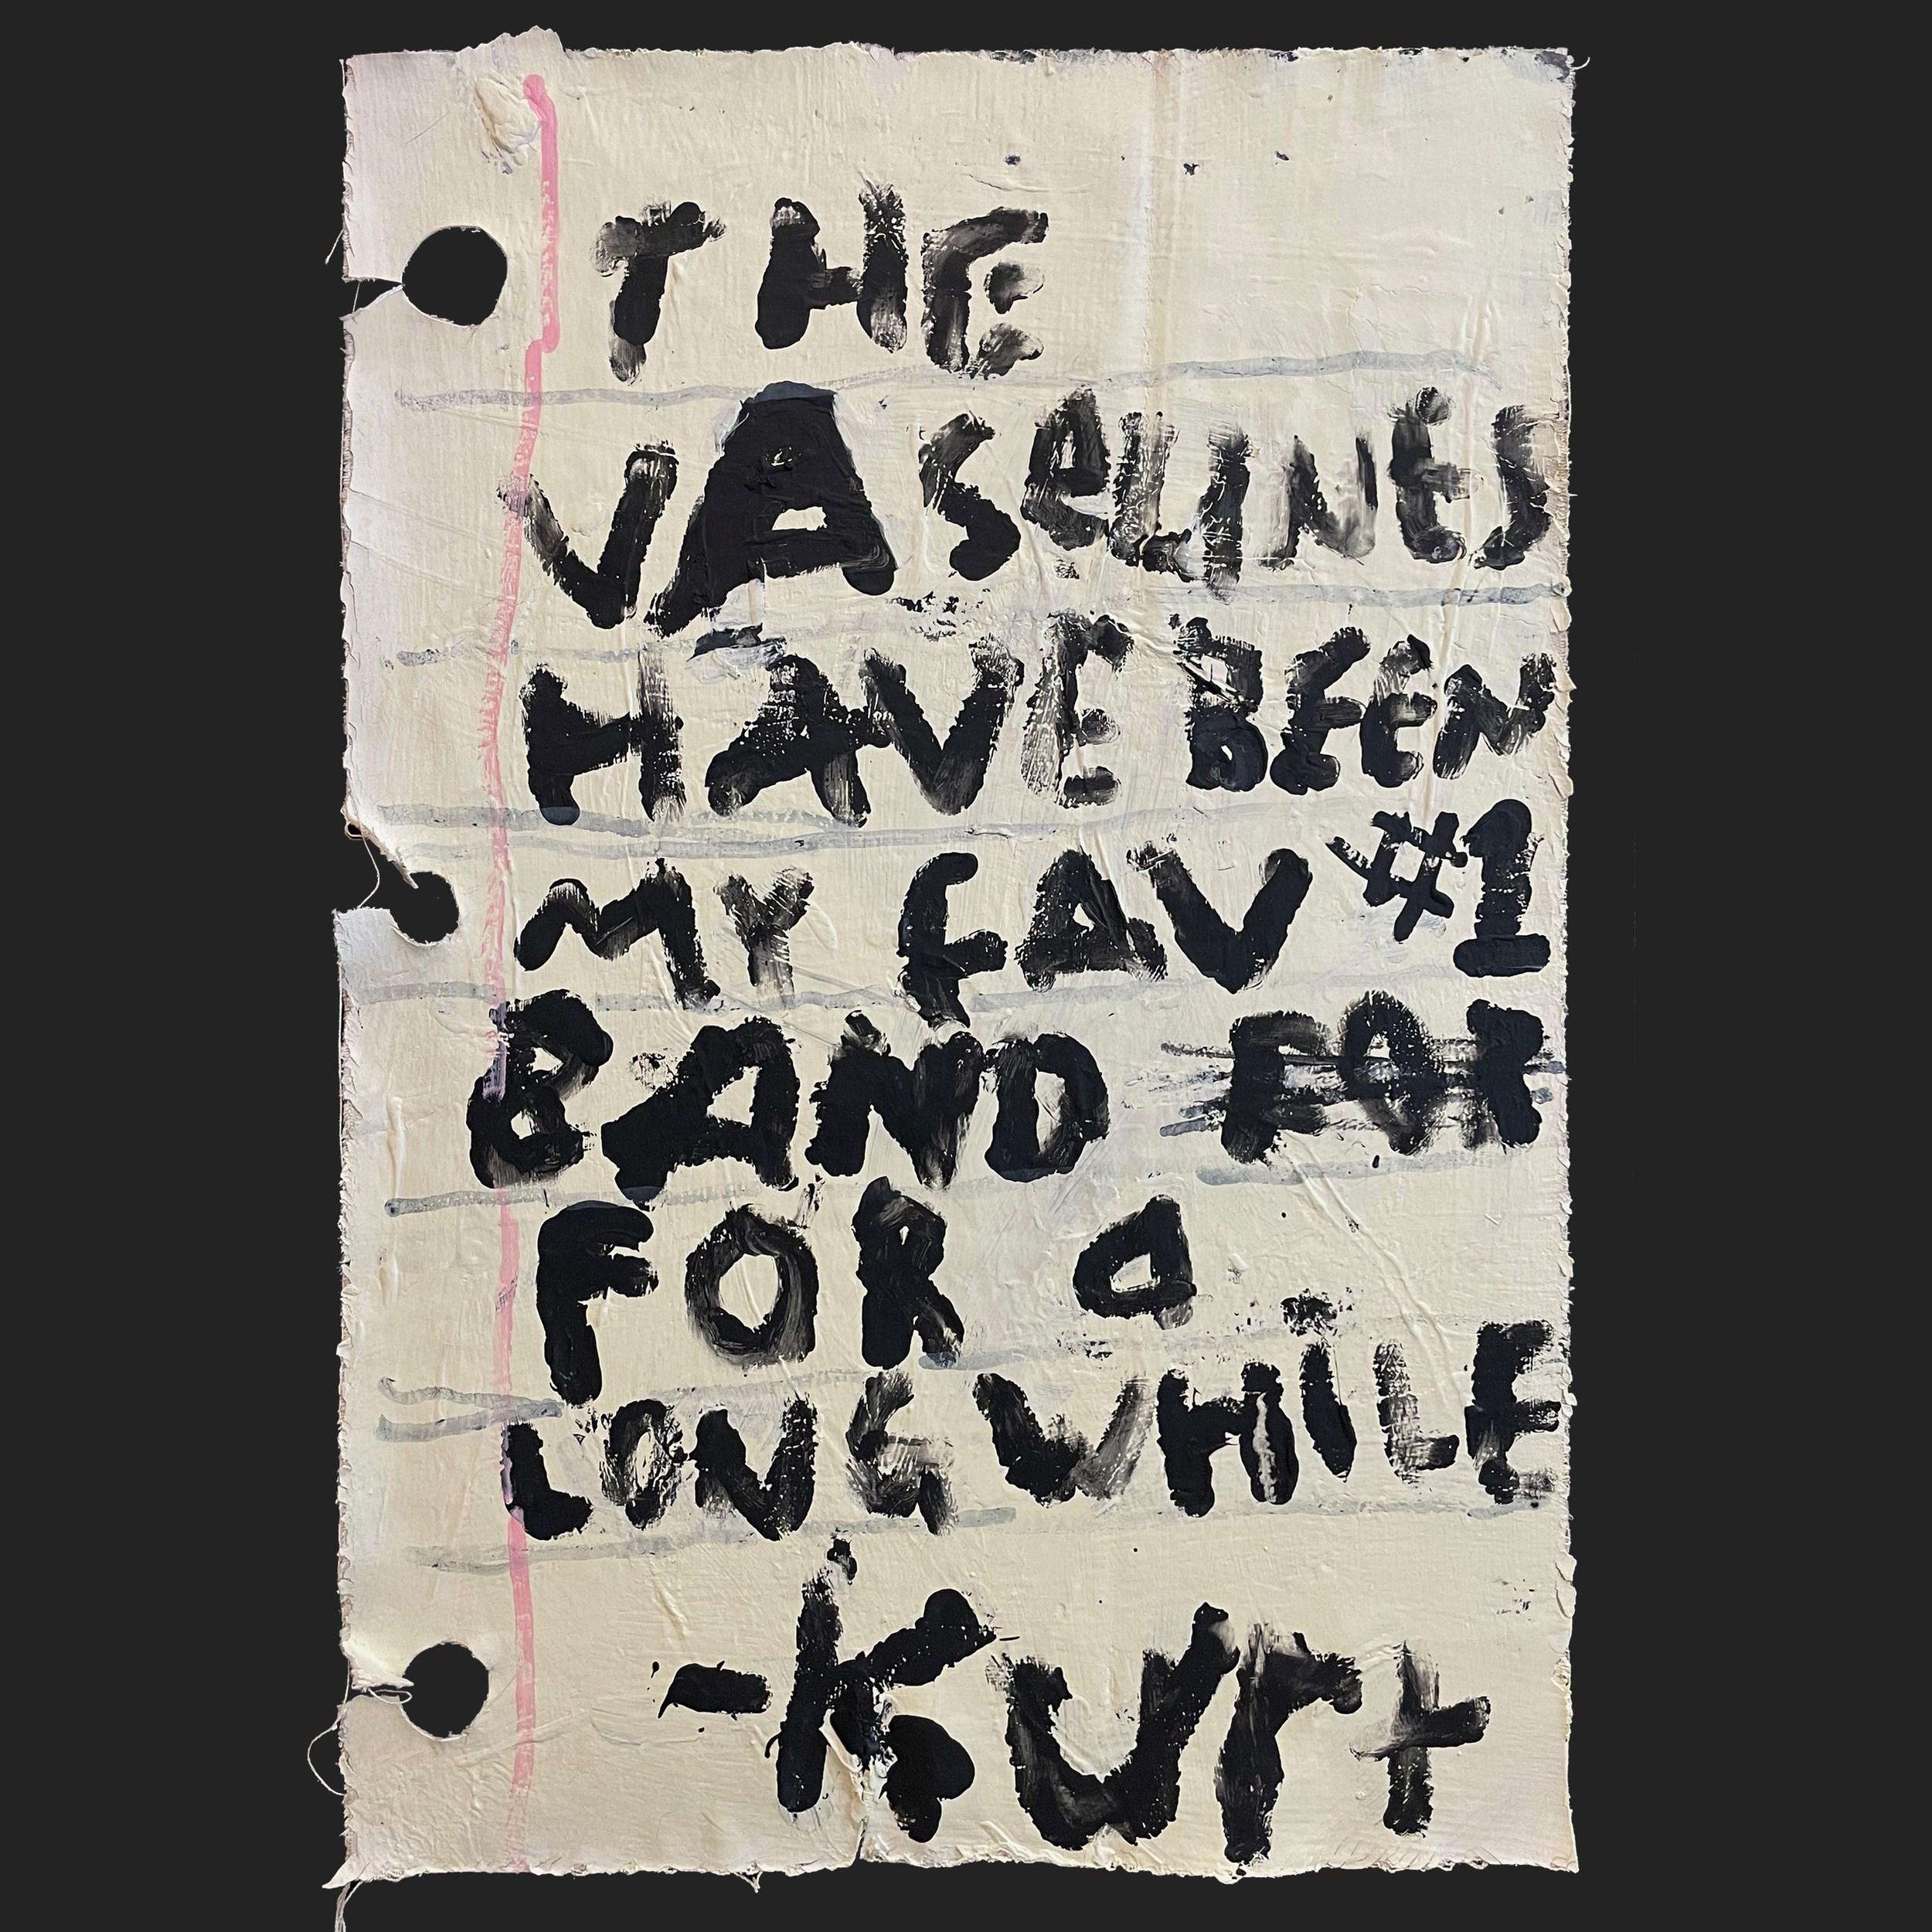 Kurt Cobain Journals #11 - Painting by Kerry Smith